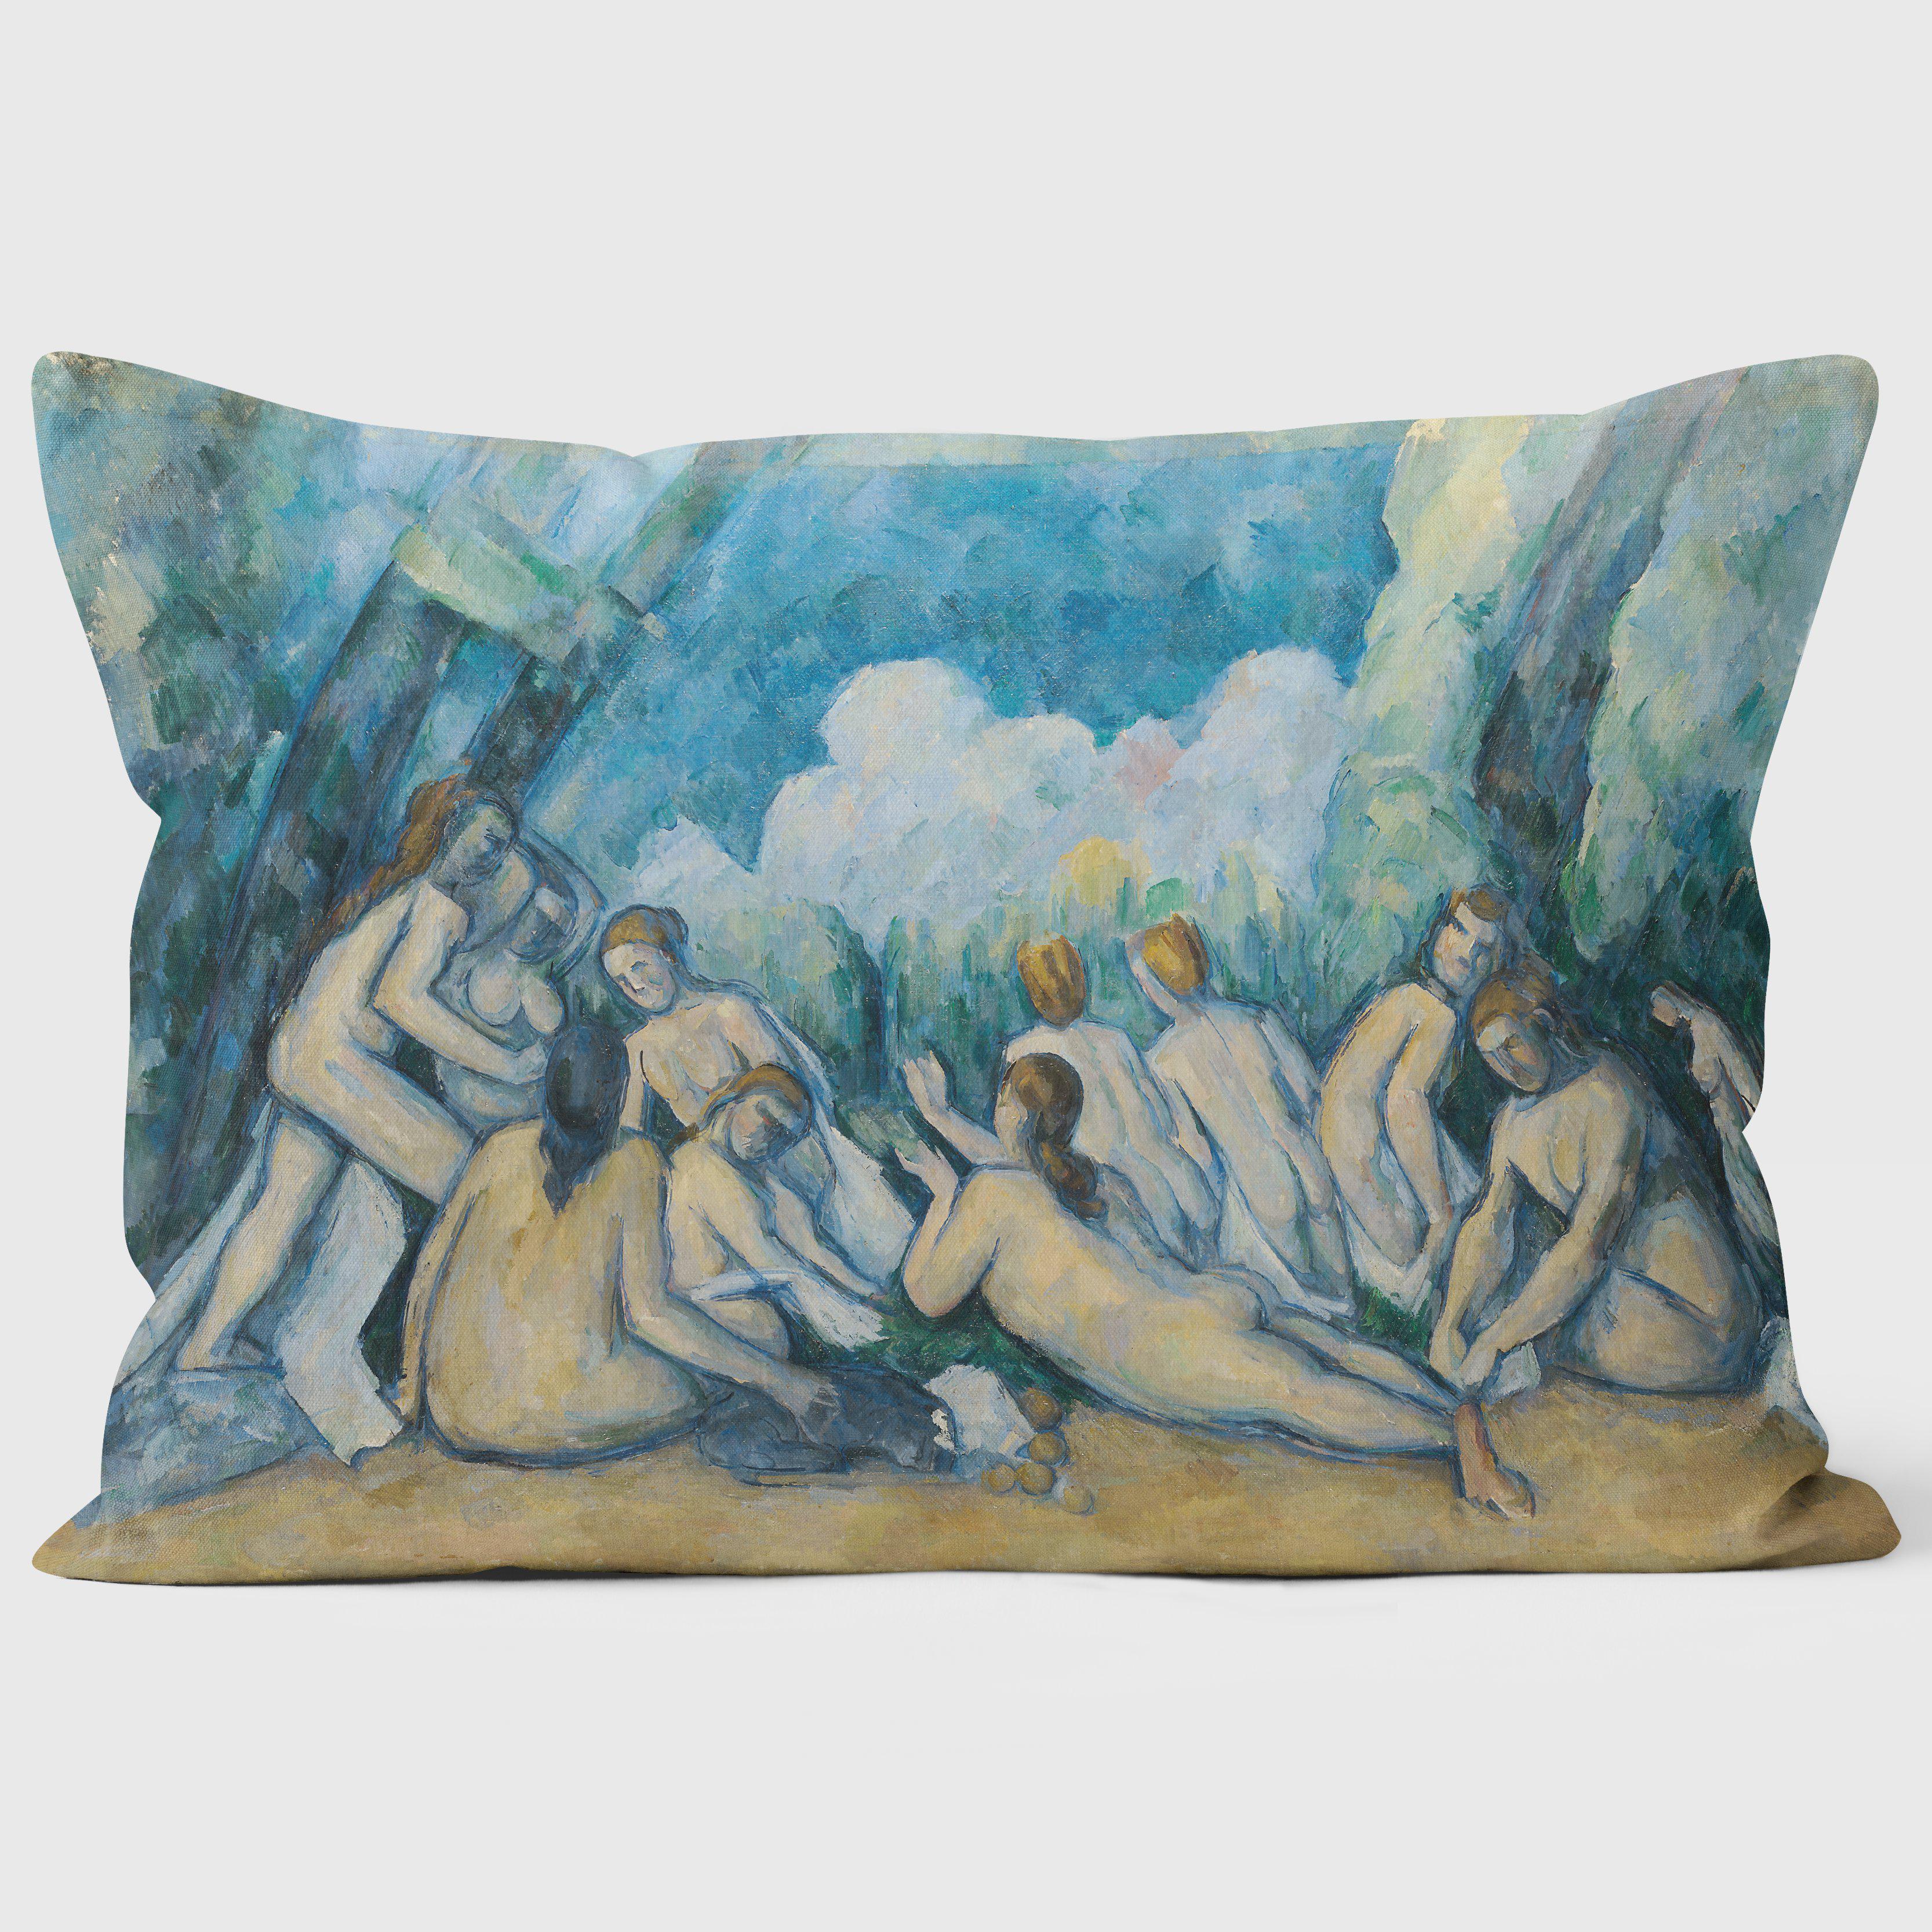 Cézanne's Bathers (Les Grandes Baigneuses) - National Gallery Cushion - Handmade Cushions UK - WeLoveCushions